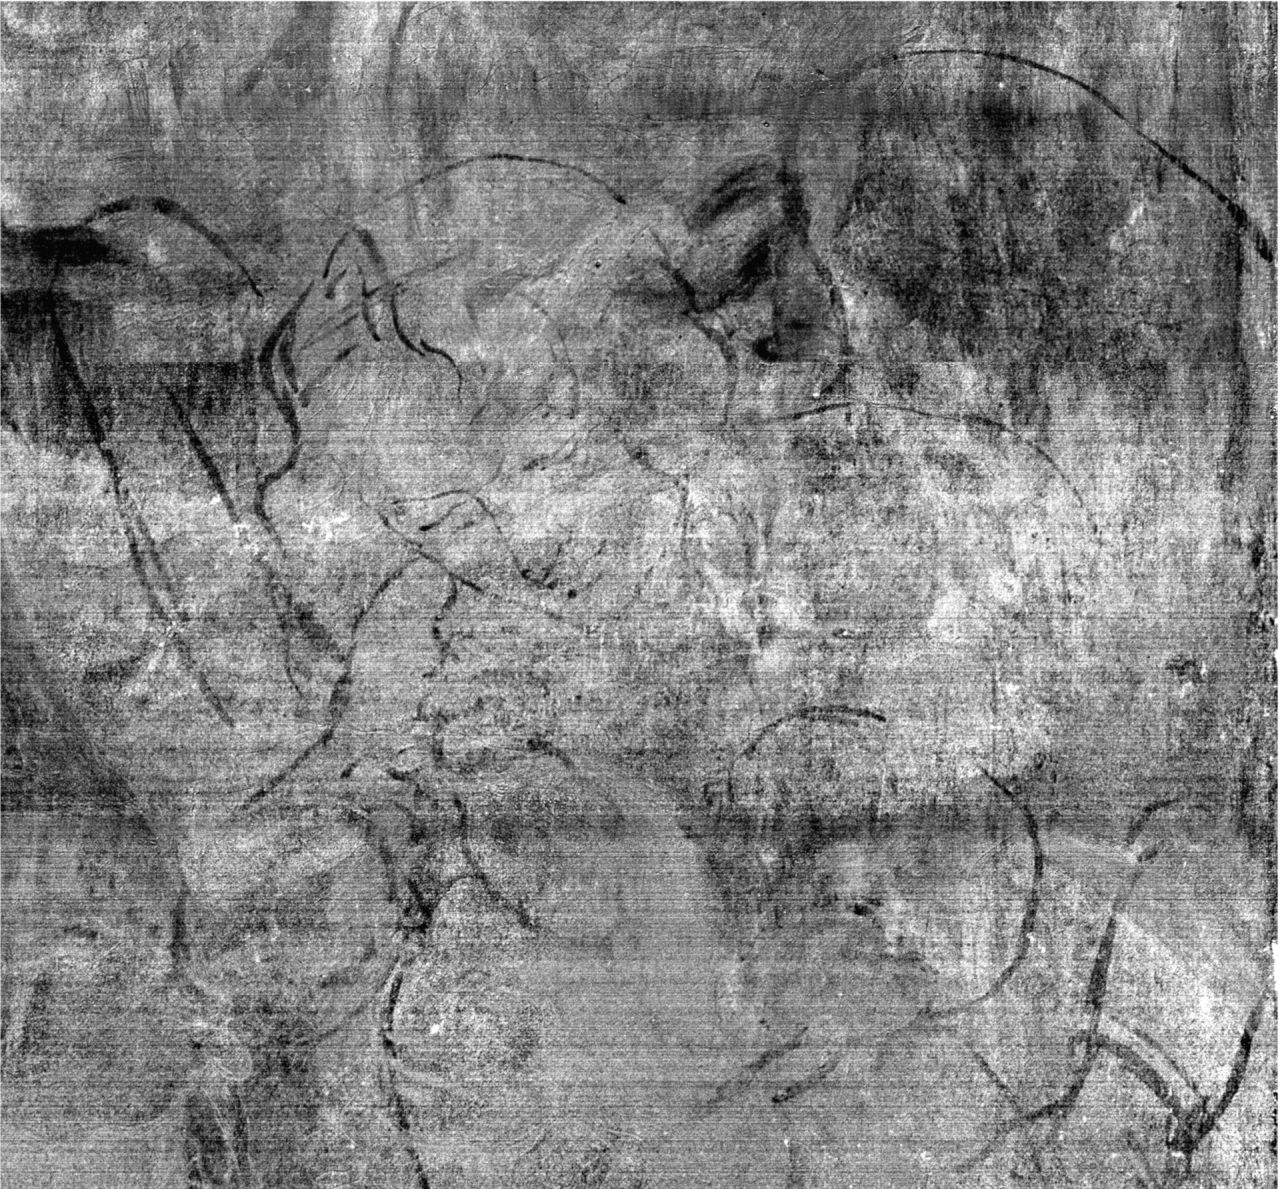 Detail from imaging data of Leonardo's painting The Virgin of the Rocks, revealing the drawing for the angel and baby of the first composition.